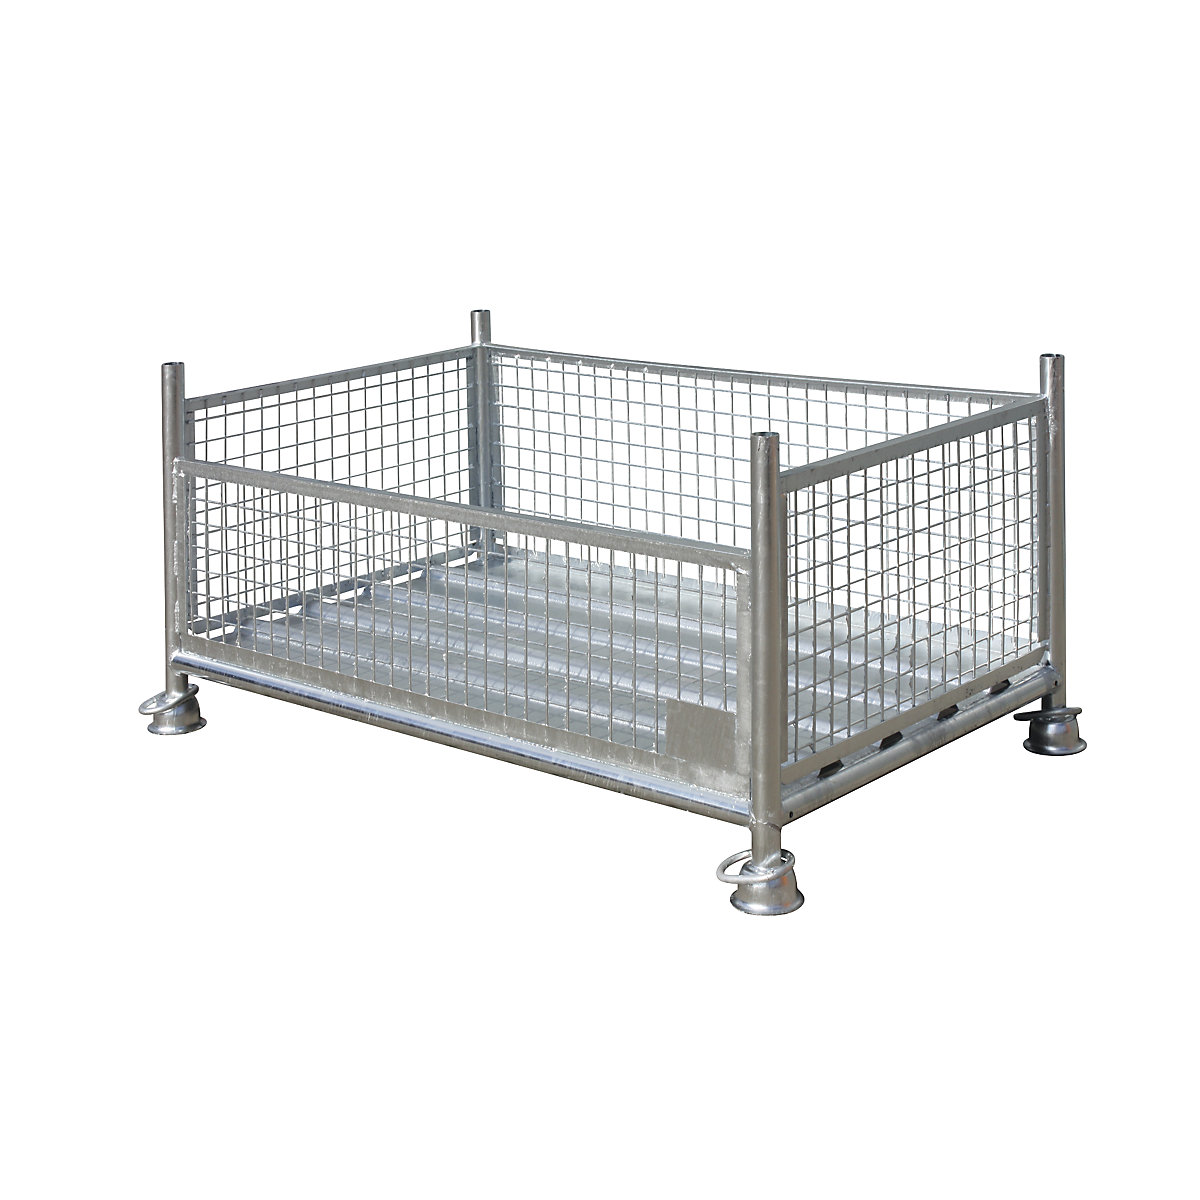 Mesh pallet stacking frame – Eichinger, LxWxH 1480 x 920 x 700 mm, zinc plated-1